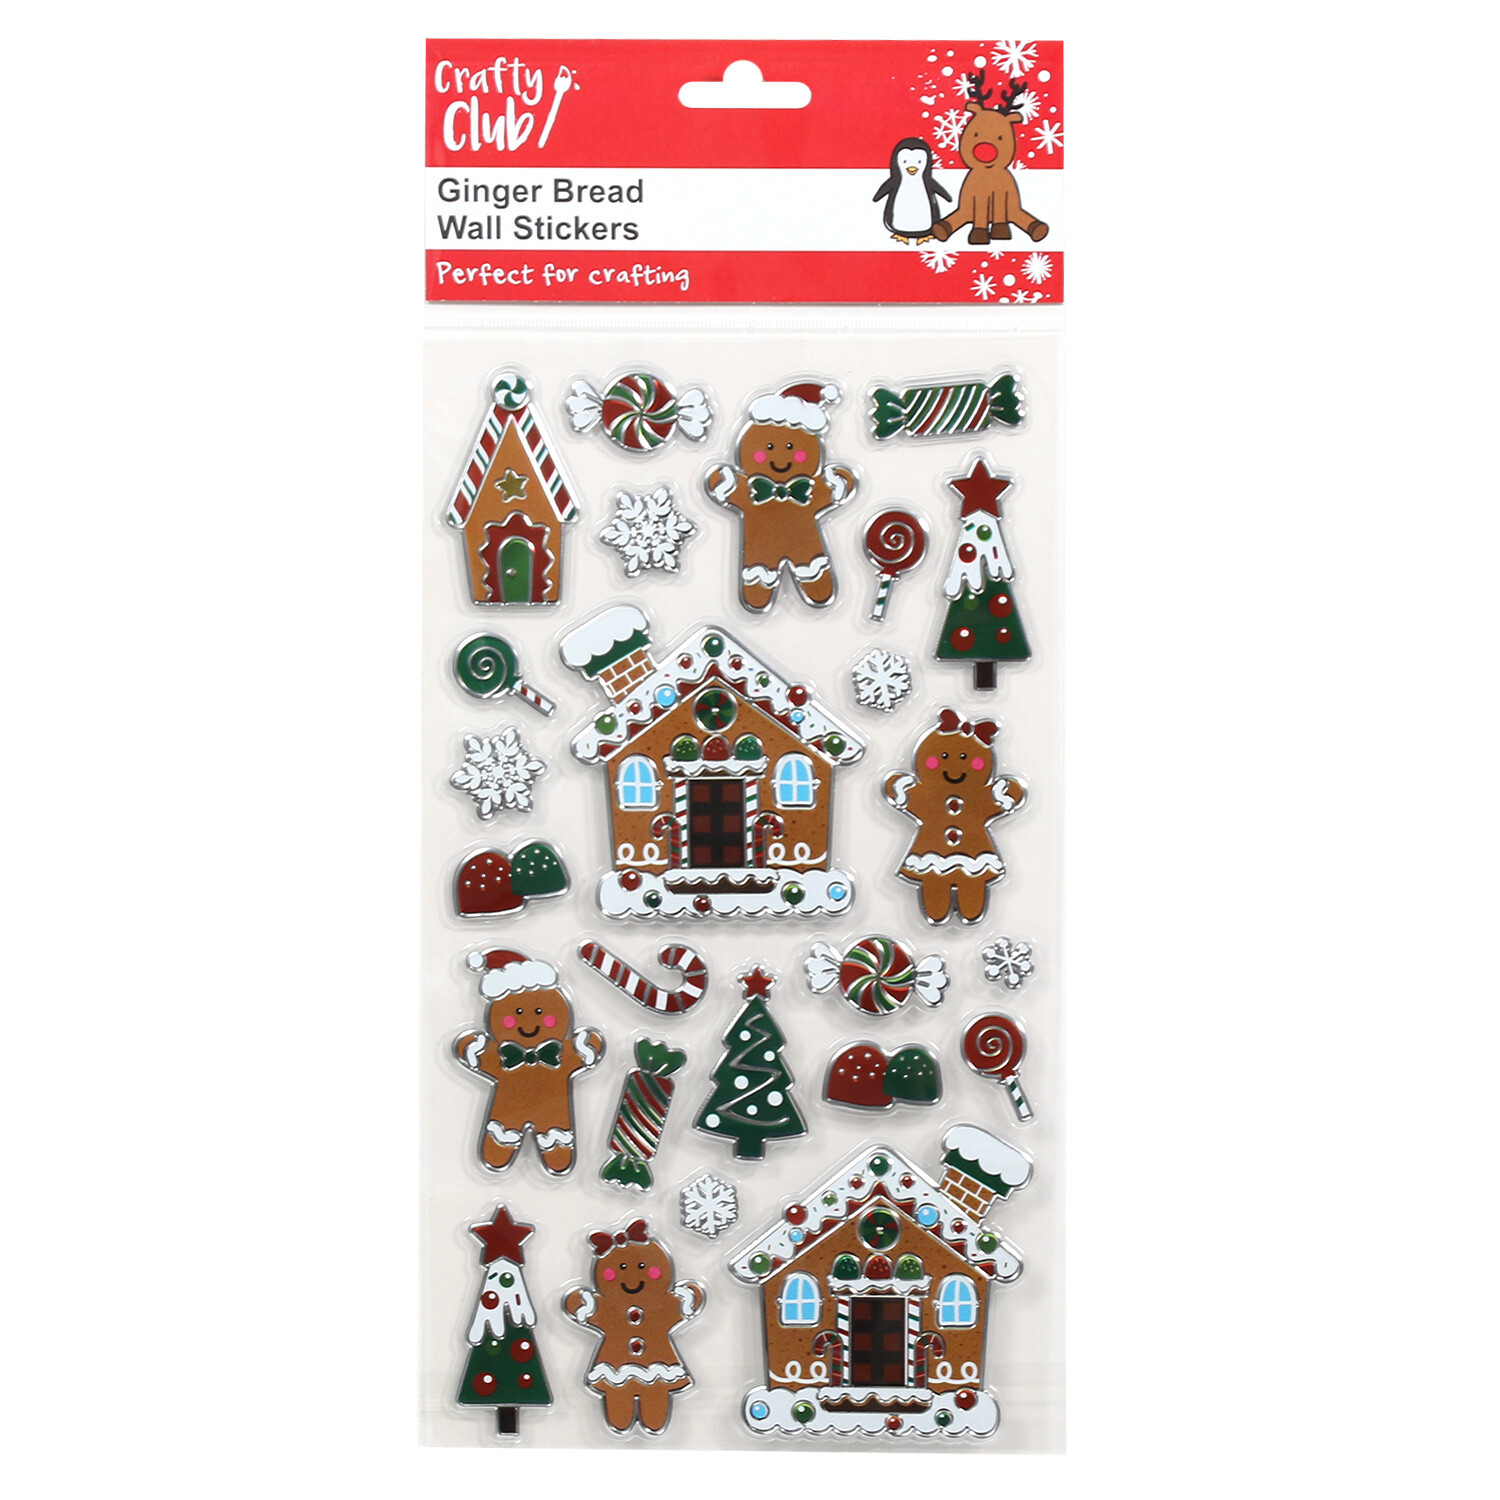 Ginger Bread Wall Stickers Image 2